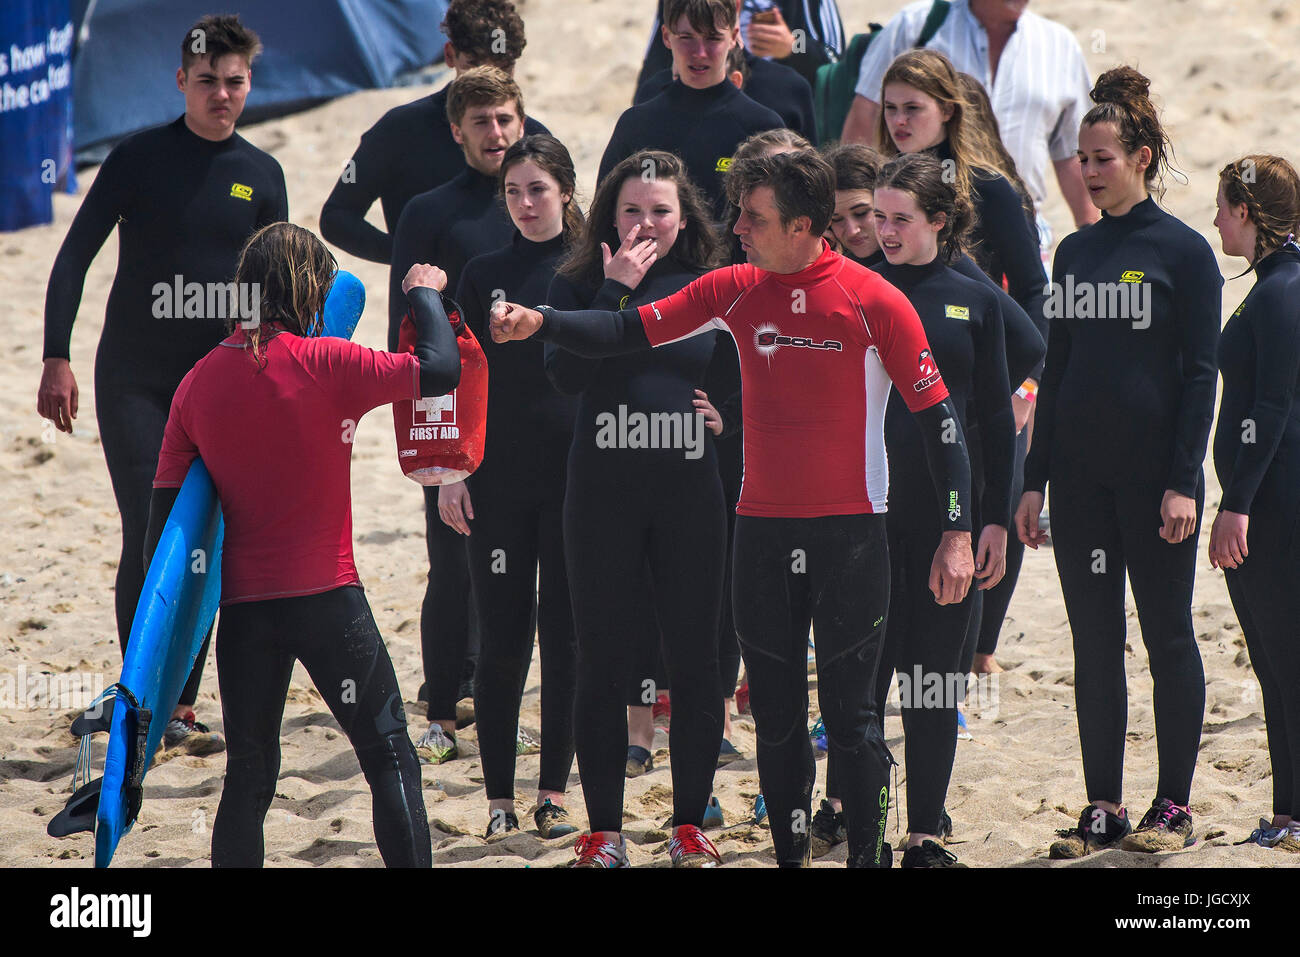 Surf school instructors greeting each other as a group of novices look on. Fistral Beach, Newquay, Cornwall. Stock Photo